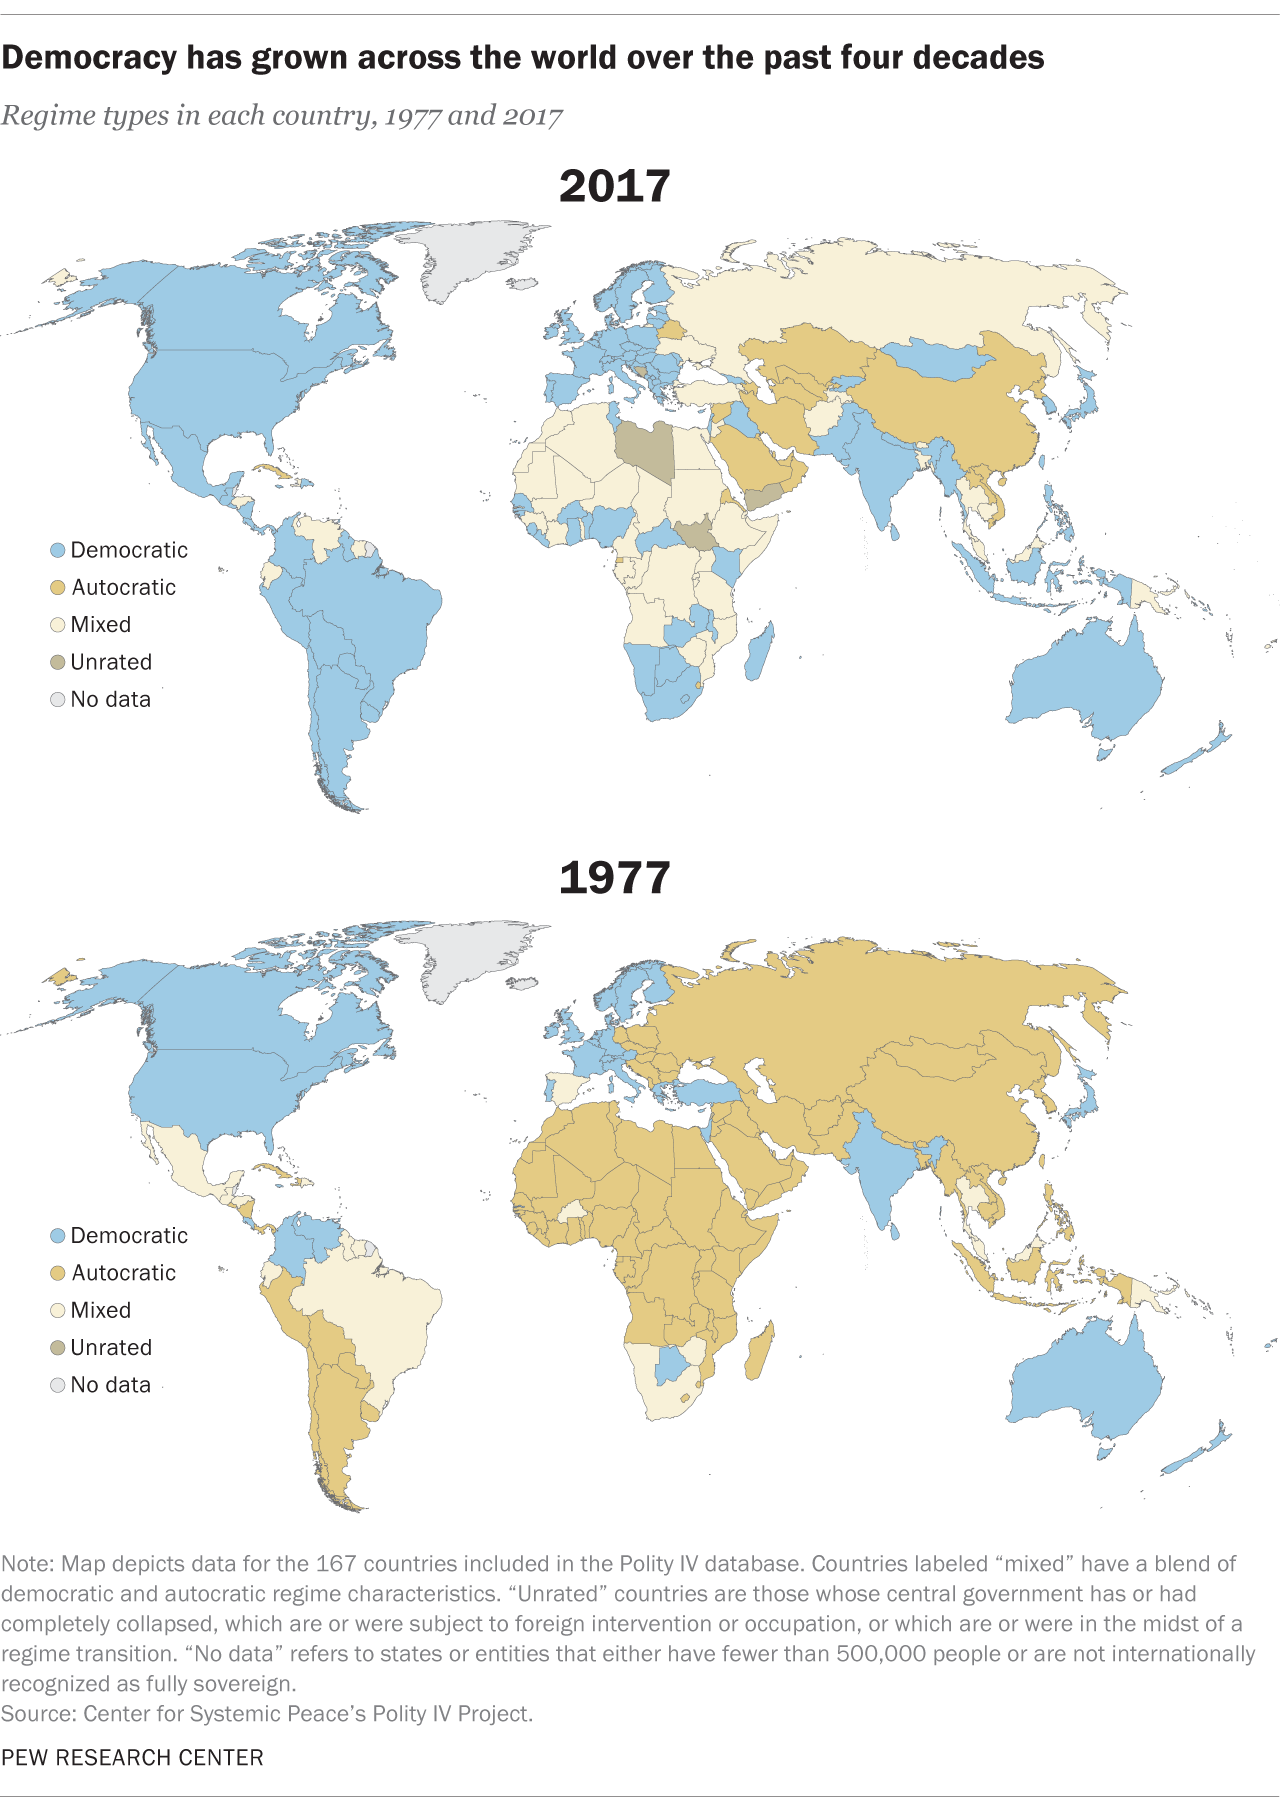 Democracy has grown across the world over the past four decades